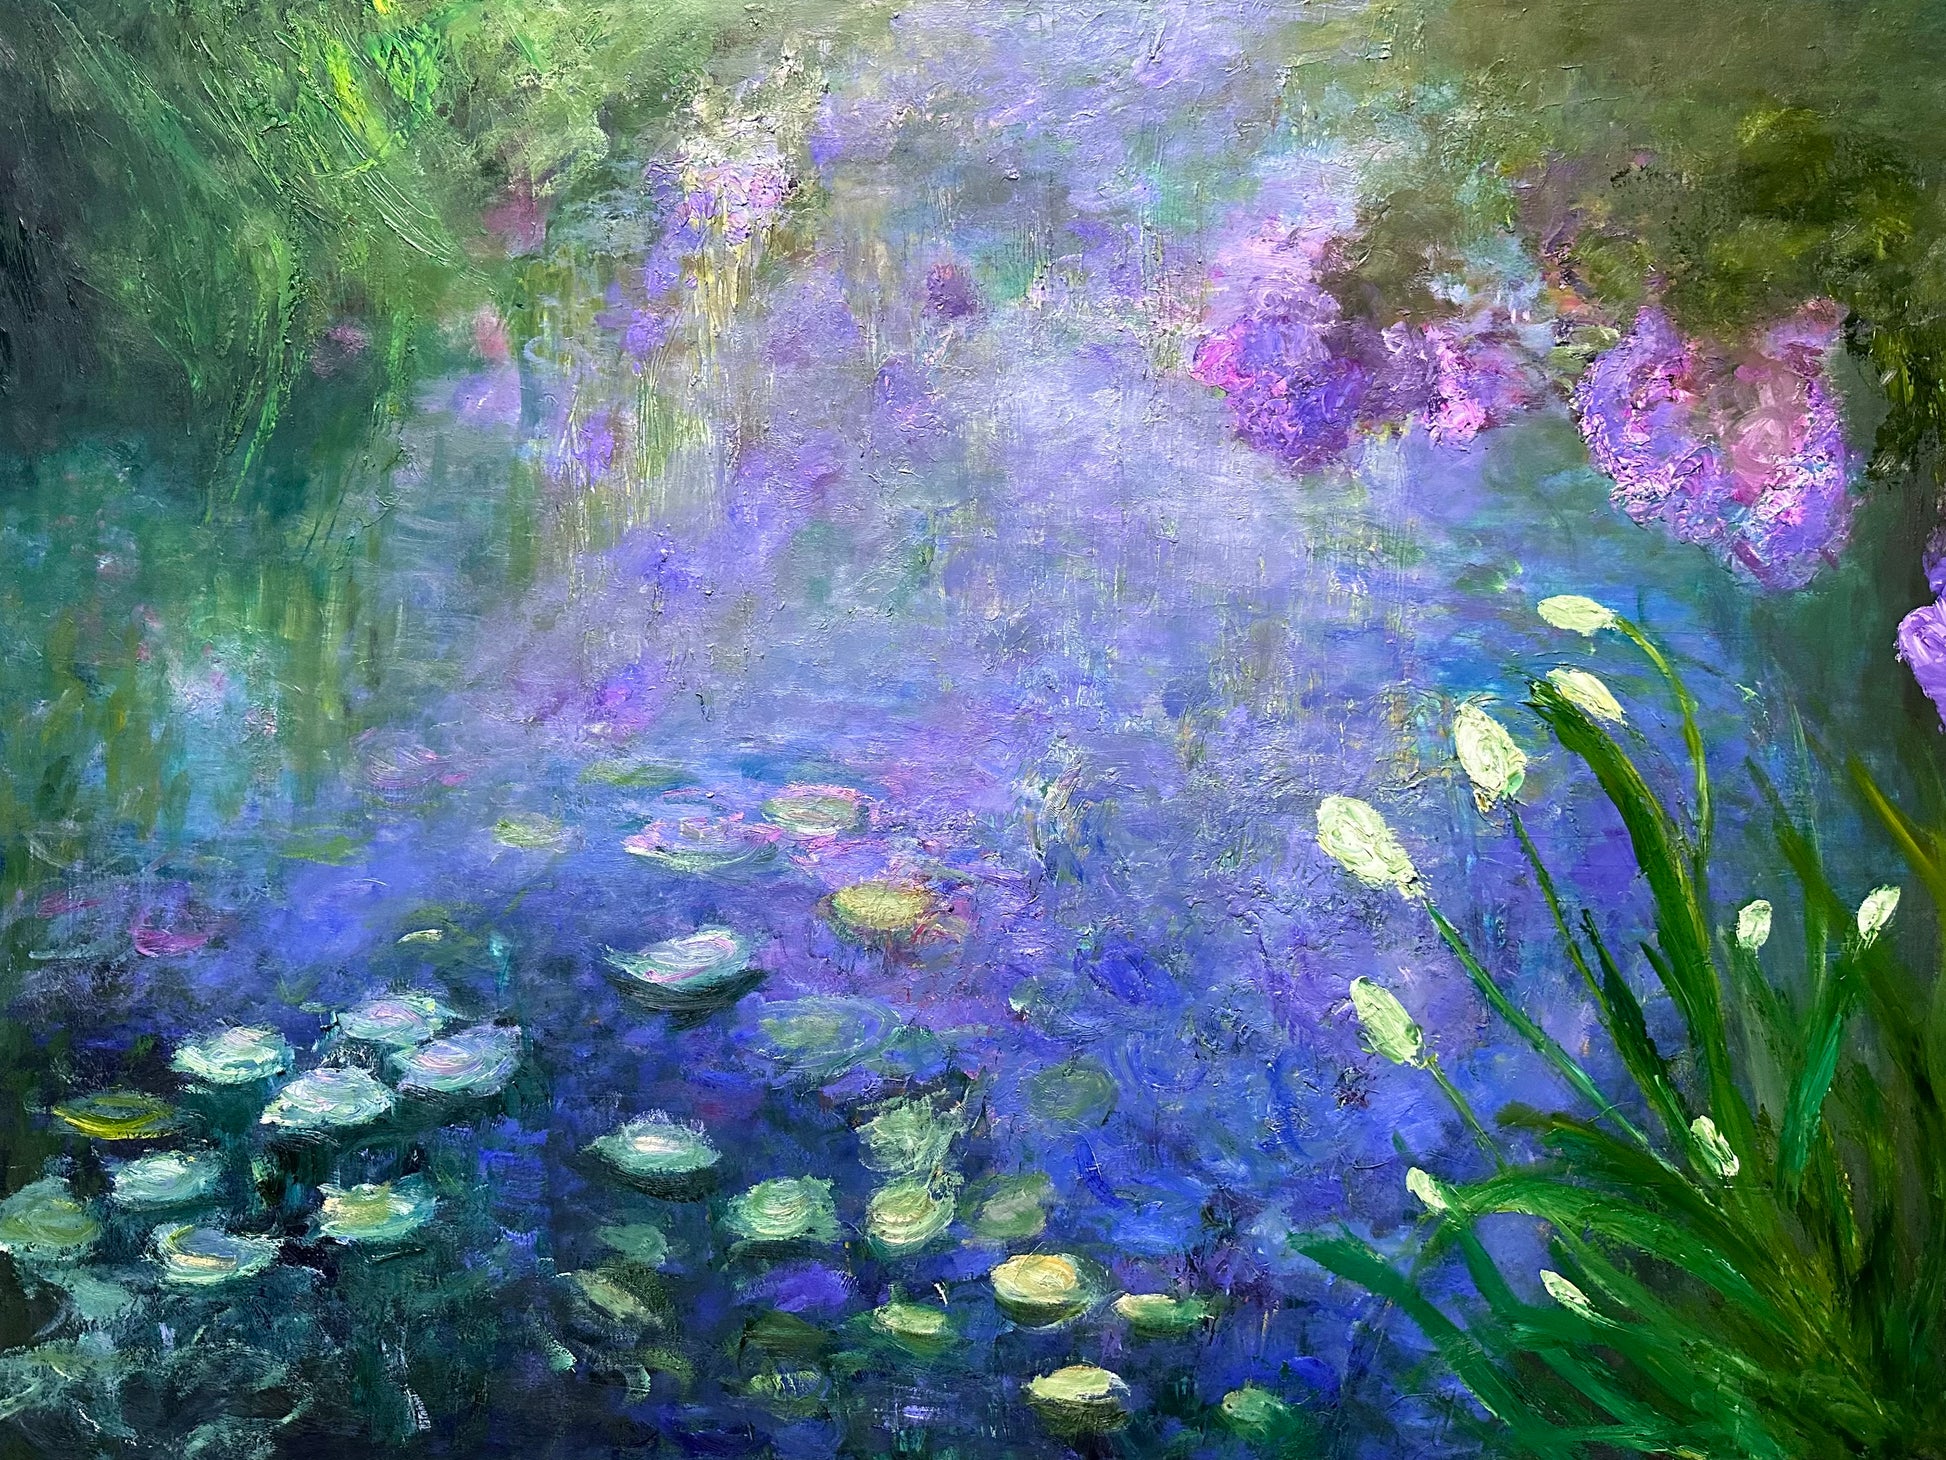 Monet-inspired abstract impressionist oil painting of a water lily scene in tones of lavenders, pinks and greens.